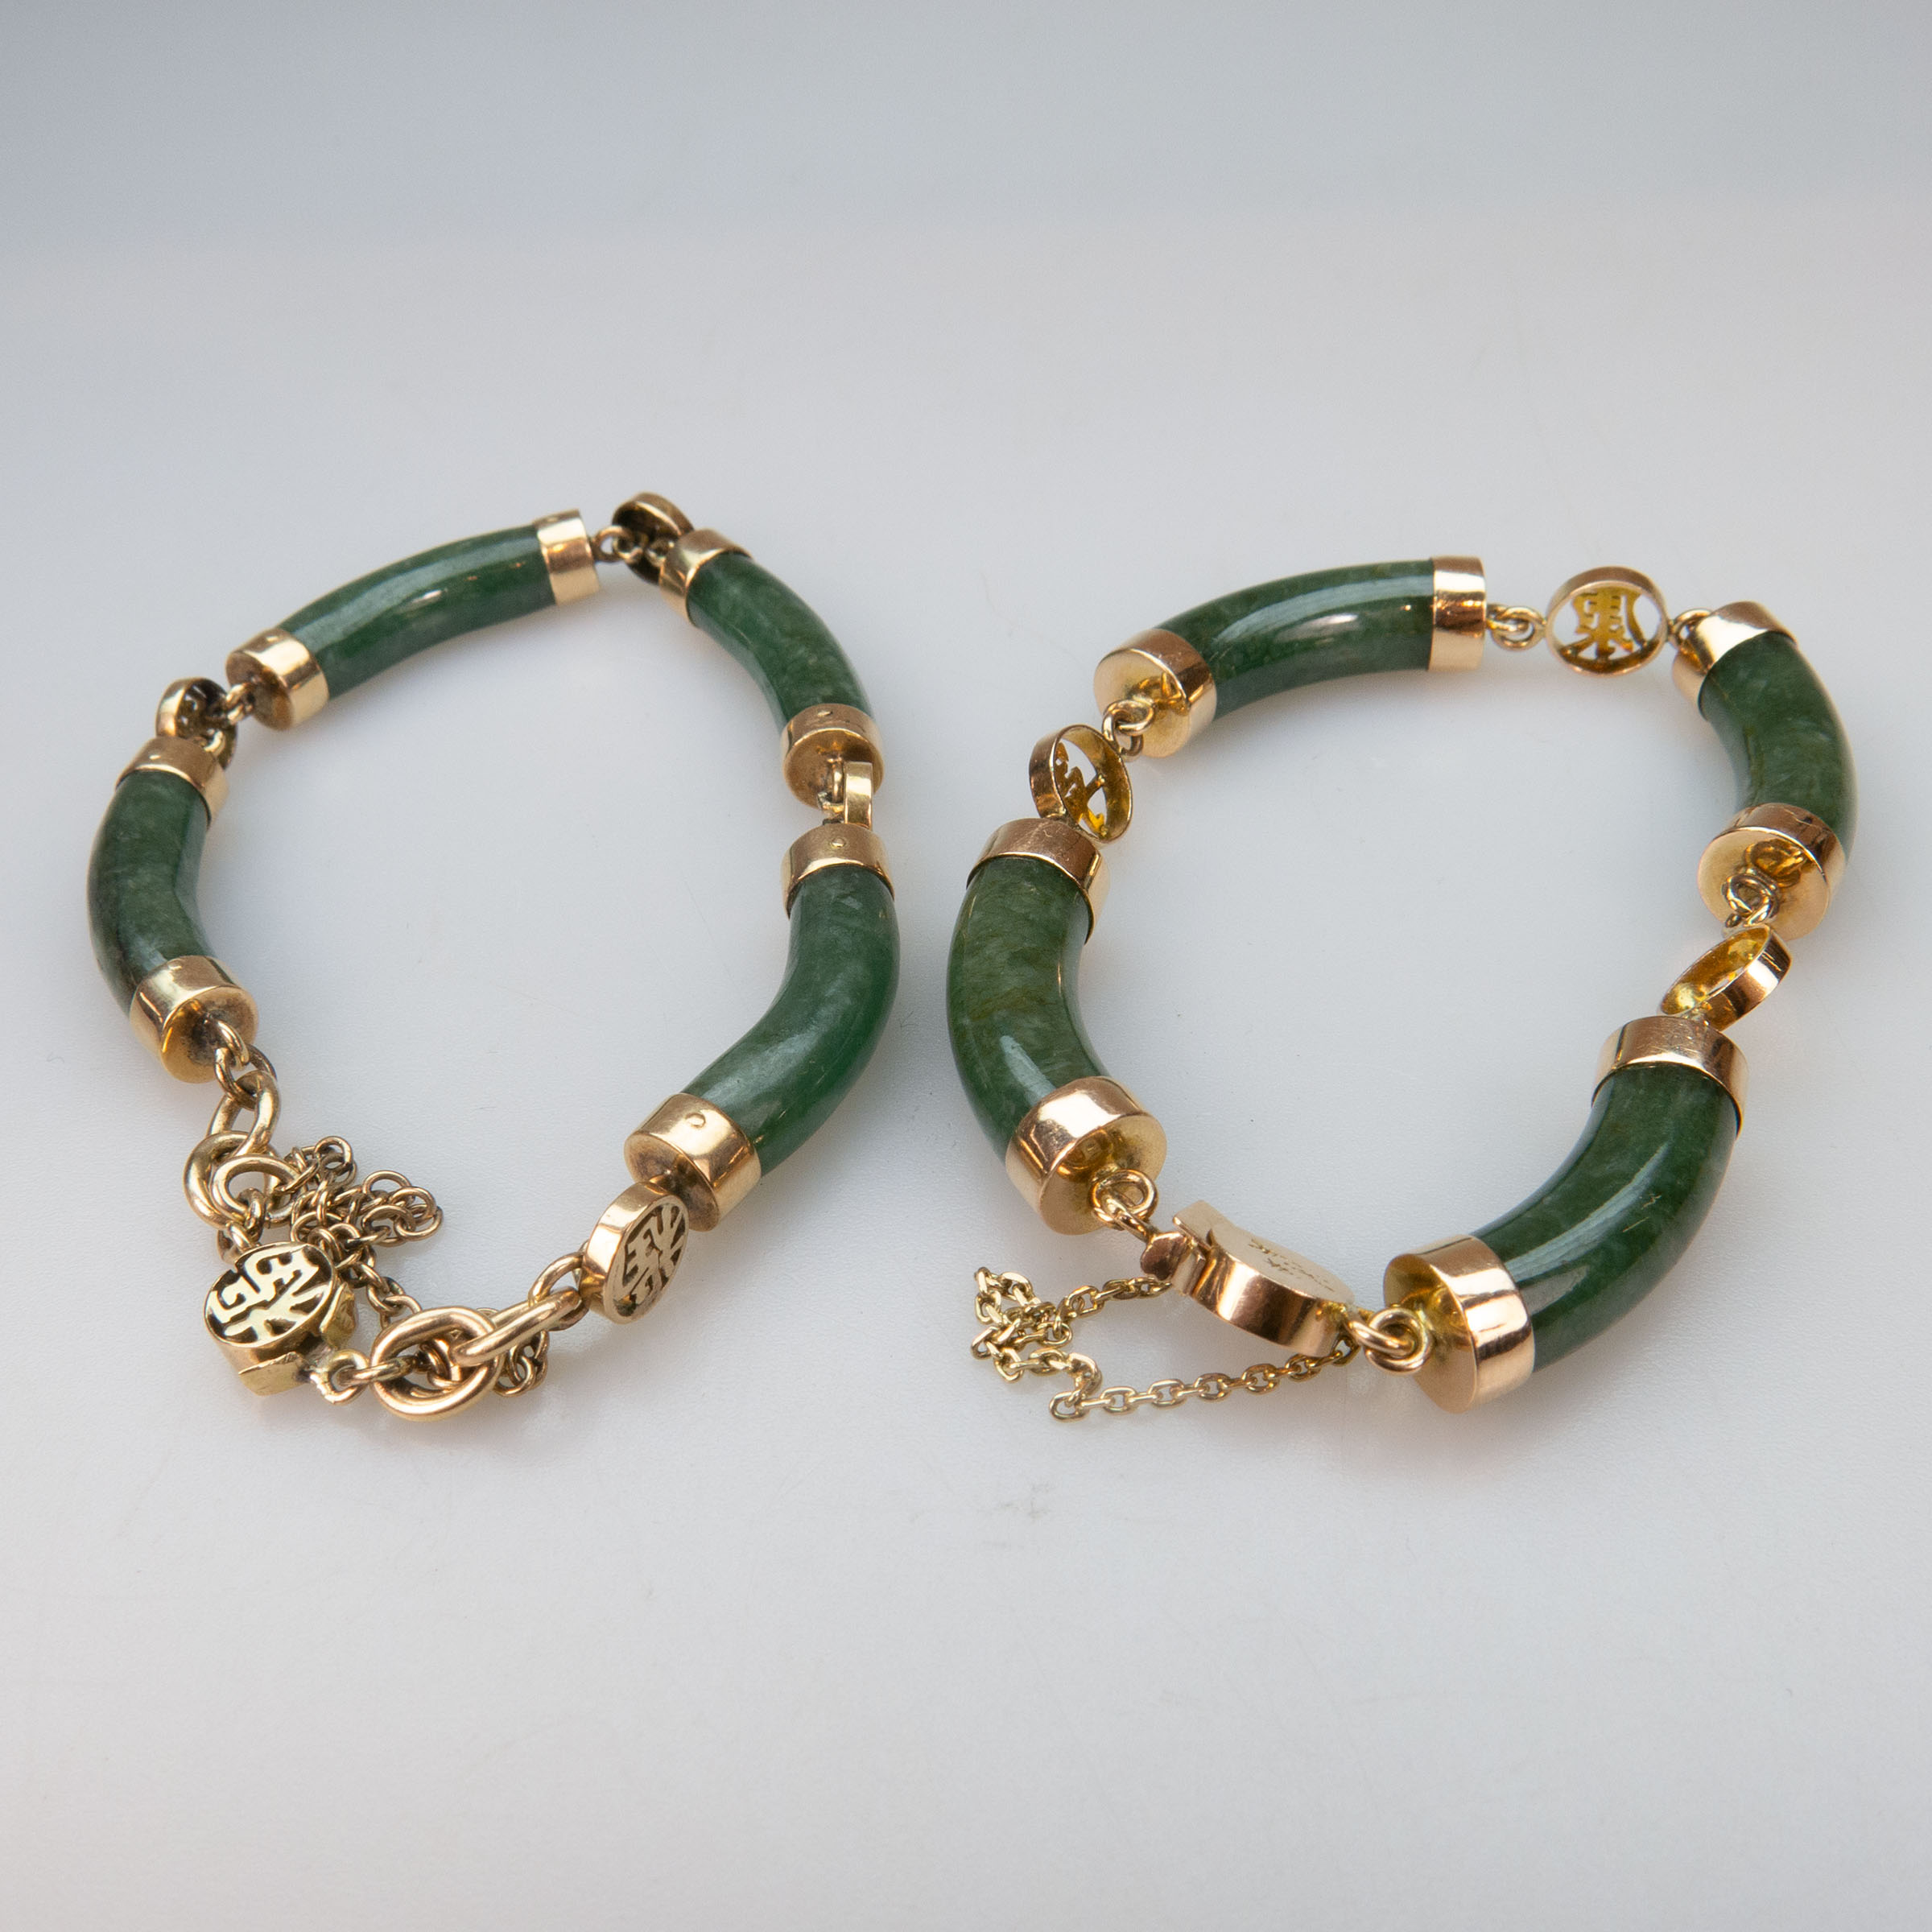 2 x 14k Yellow Gold And Nephrite Bracelets